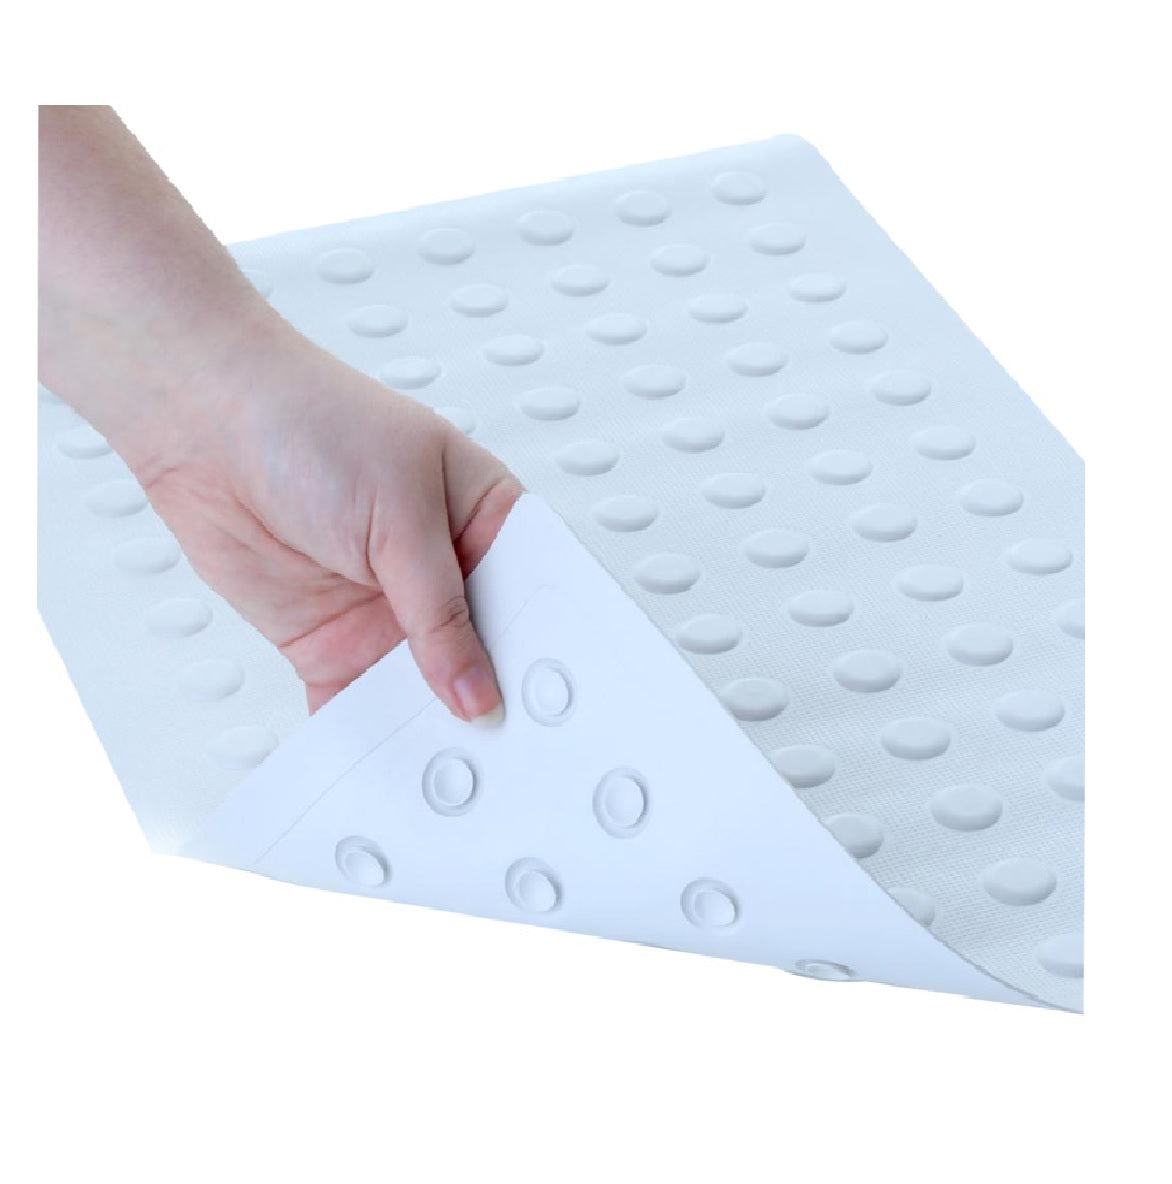 SlipX Solutions 06401 Safety Bath Mat with Microban